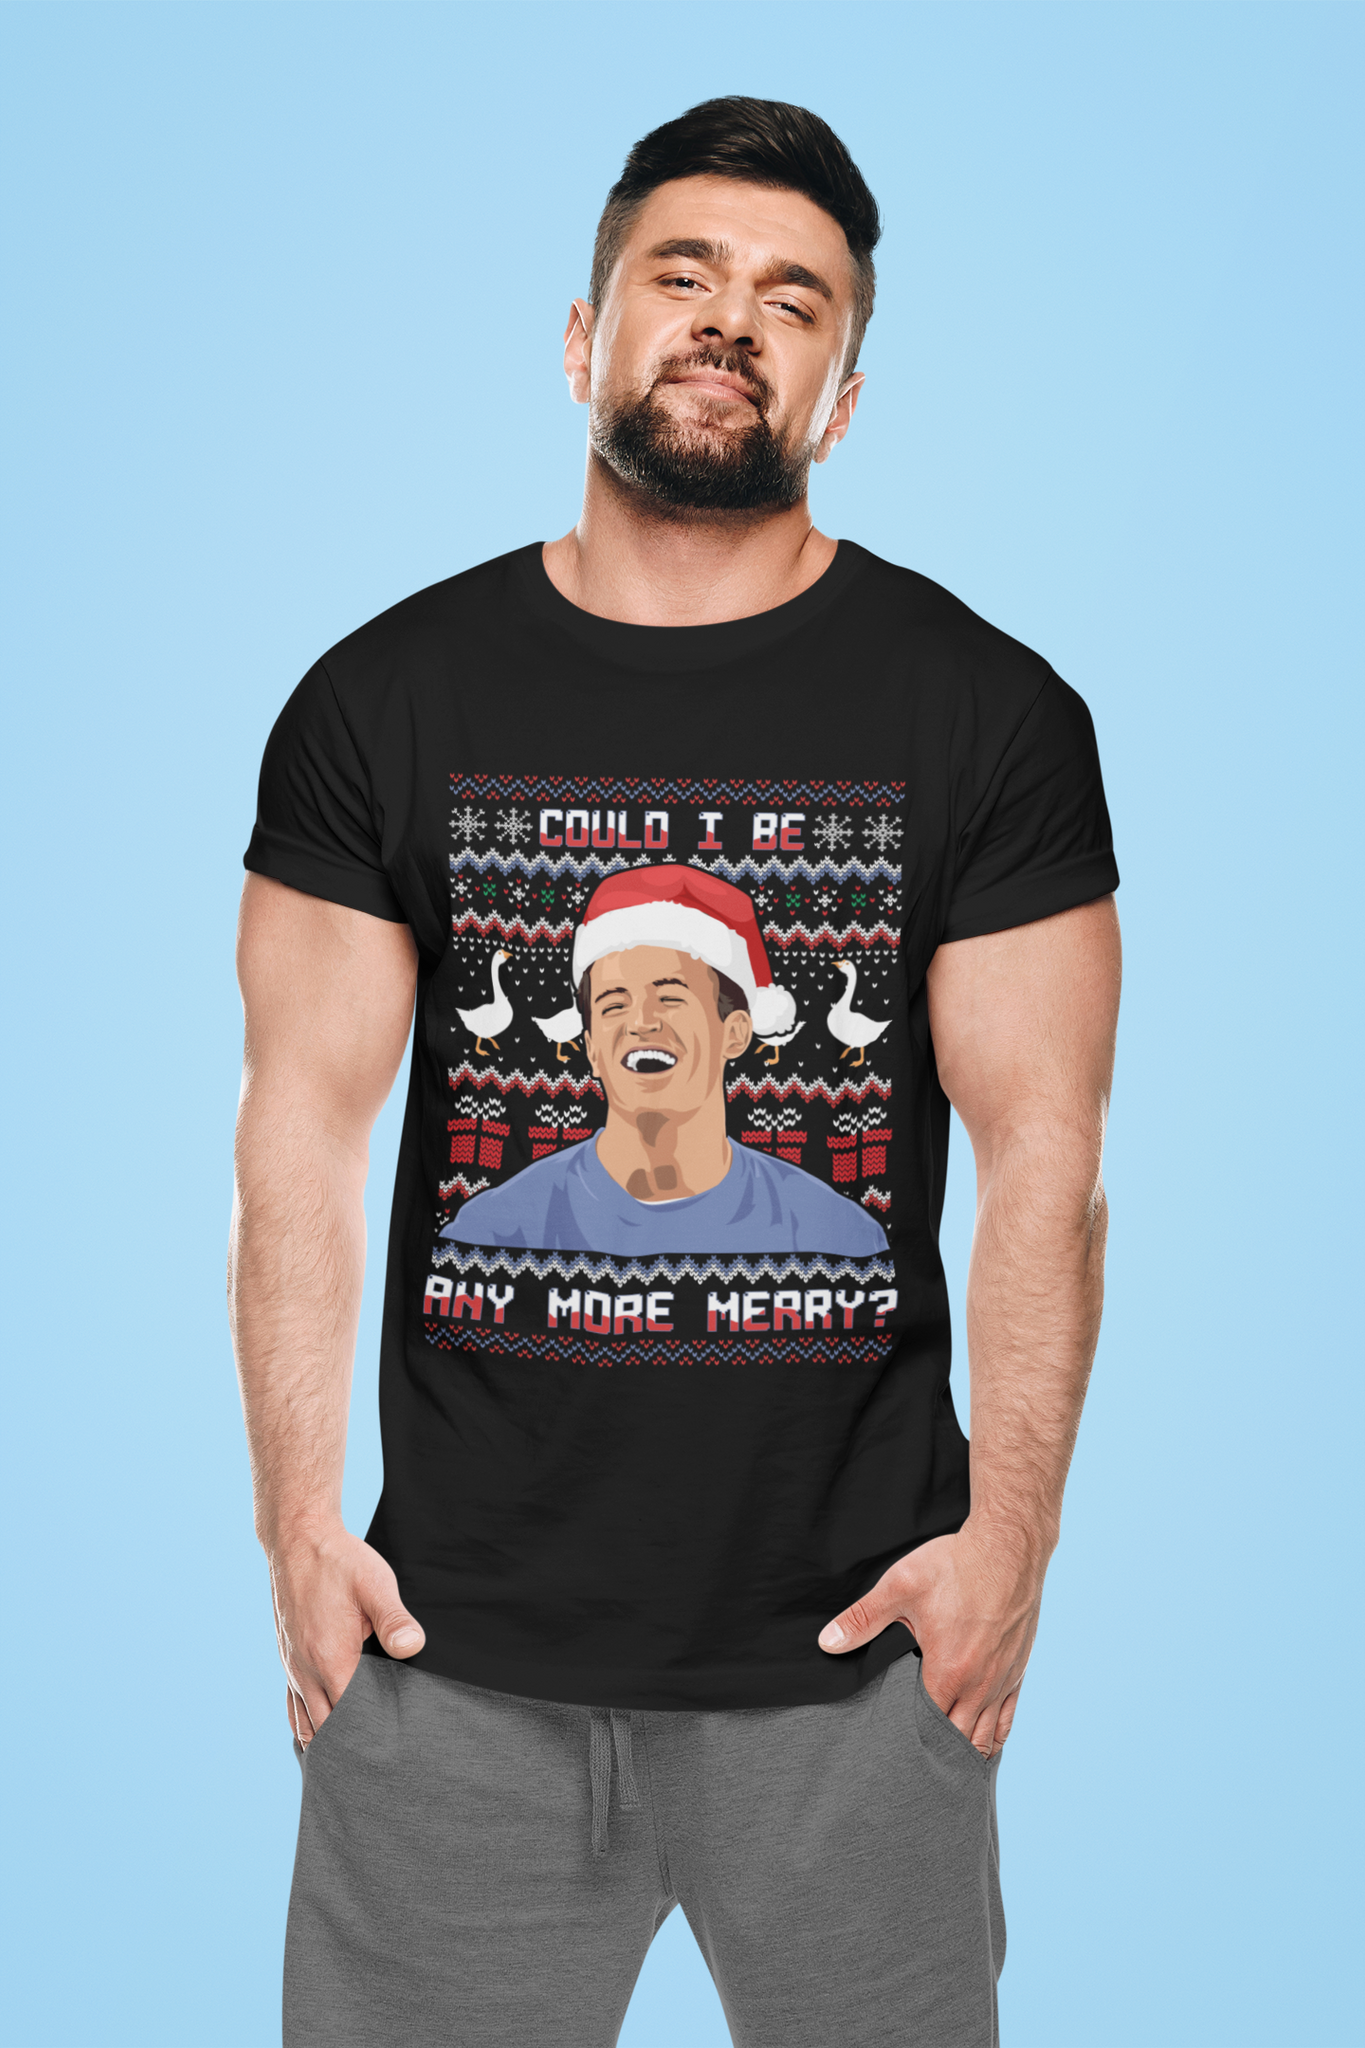 Friends TV Show Ugly Sweater T Shirt, Chandler T Shirt, Could I Be Any More Merry Tshirt, Christmas Gifts